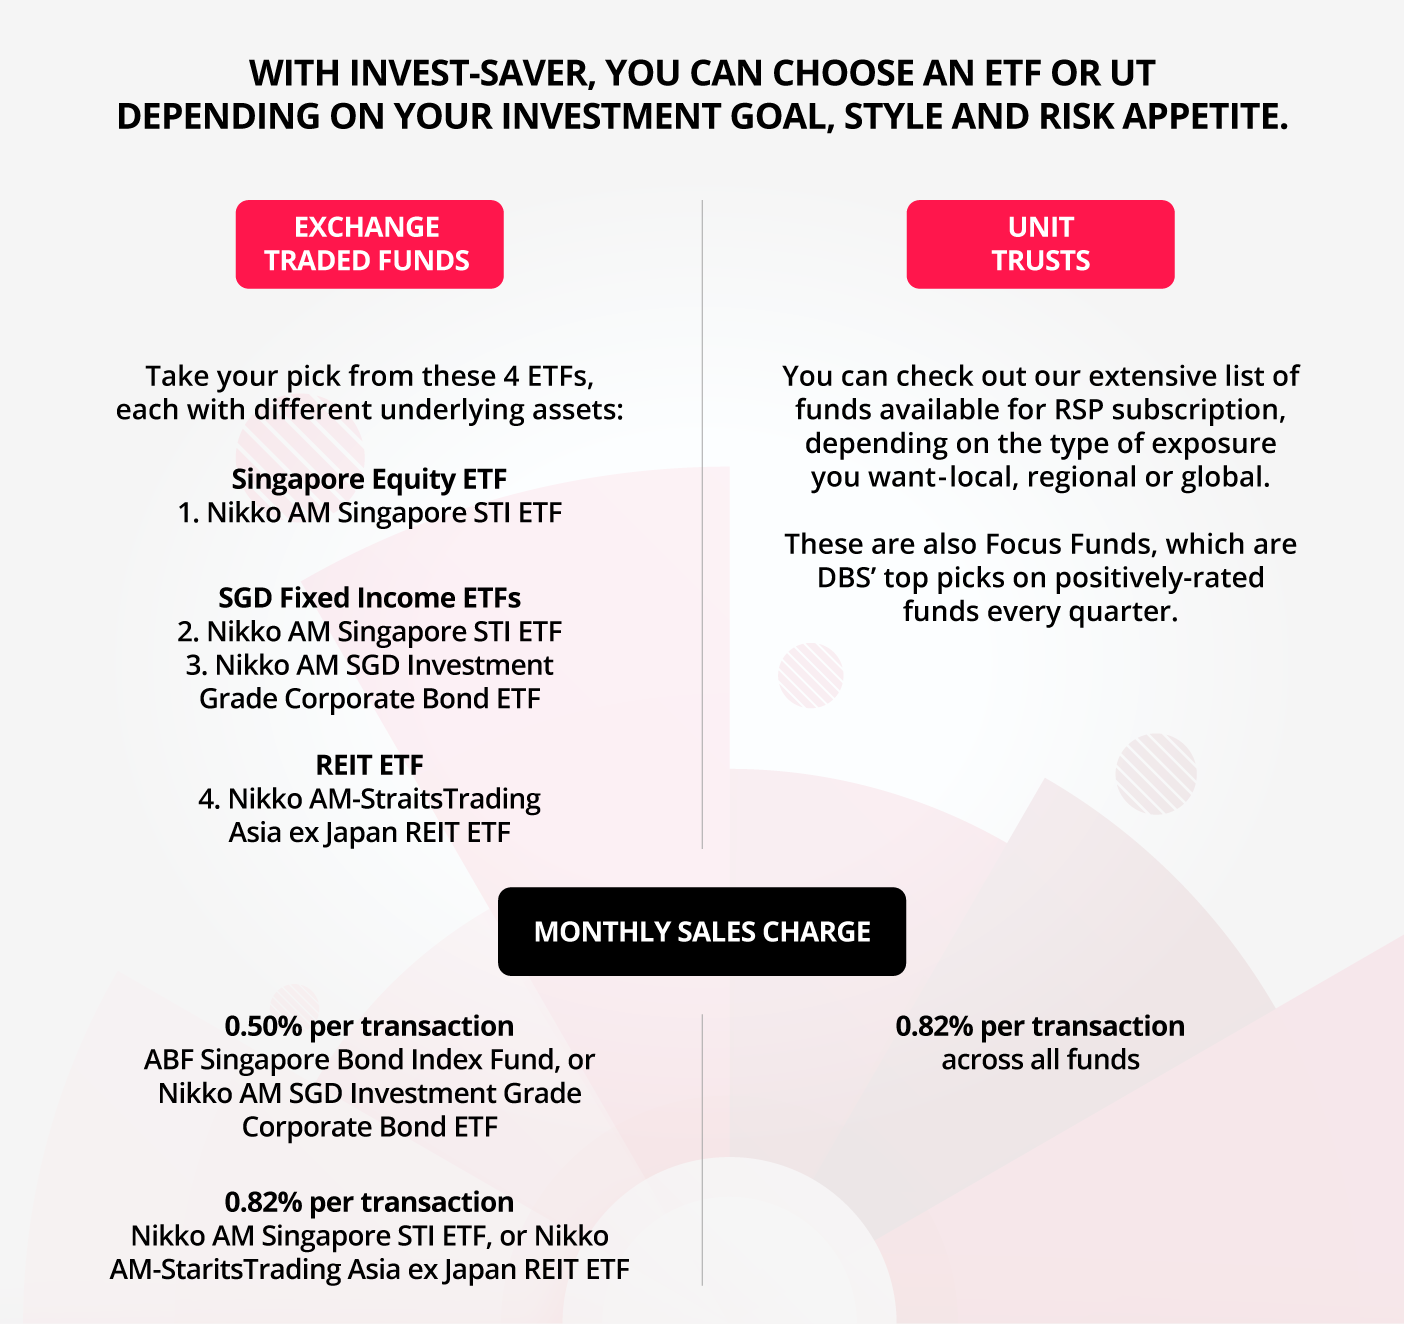 With Invest-Saver, you can choose an ETF or Unit Trust depending on your investment goal, style and risk appetite.